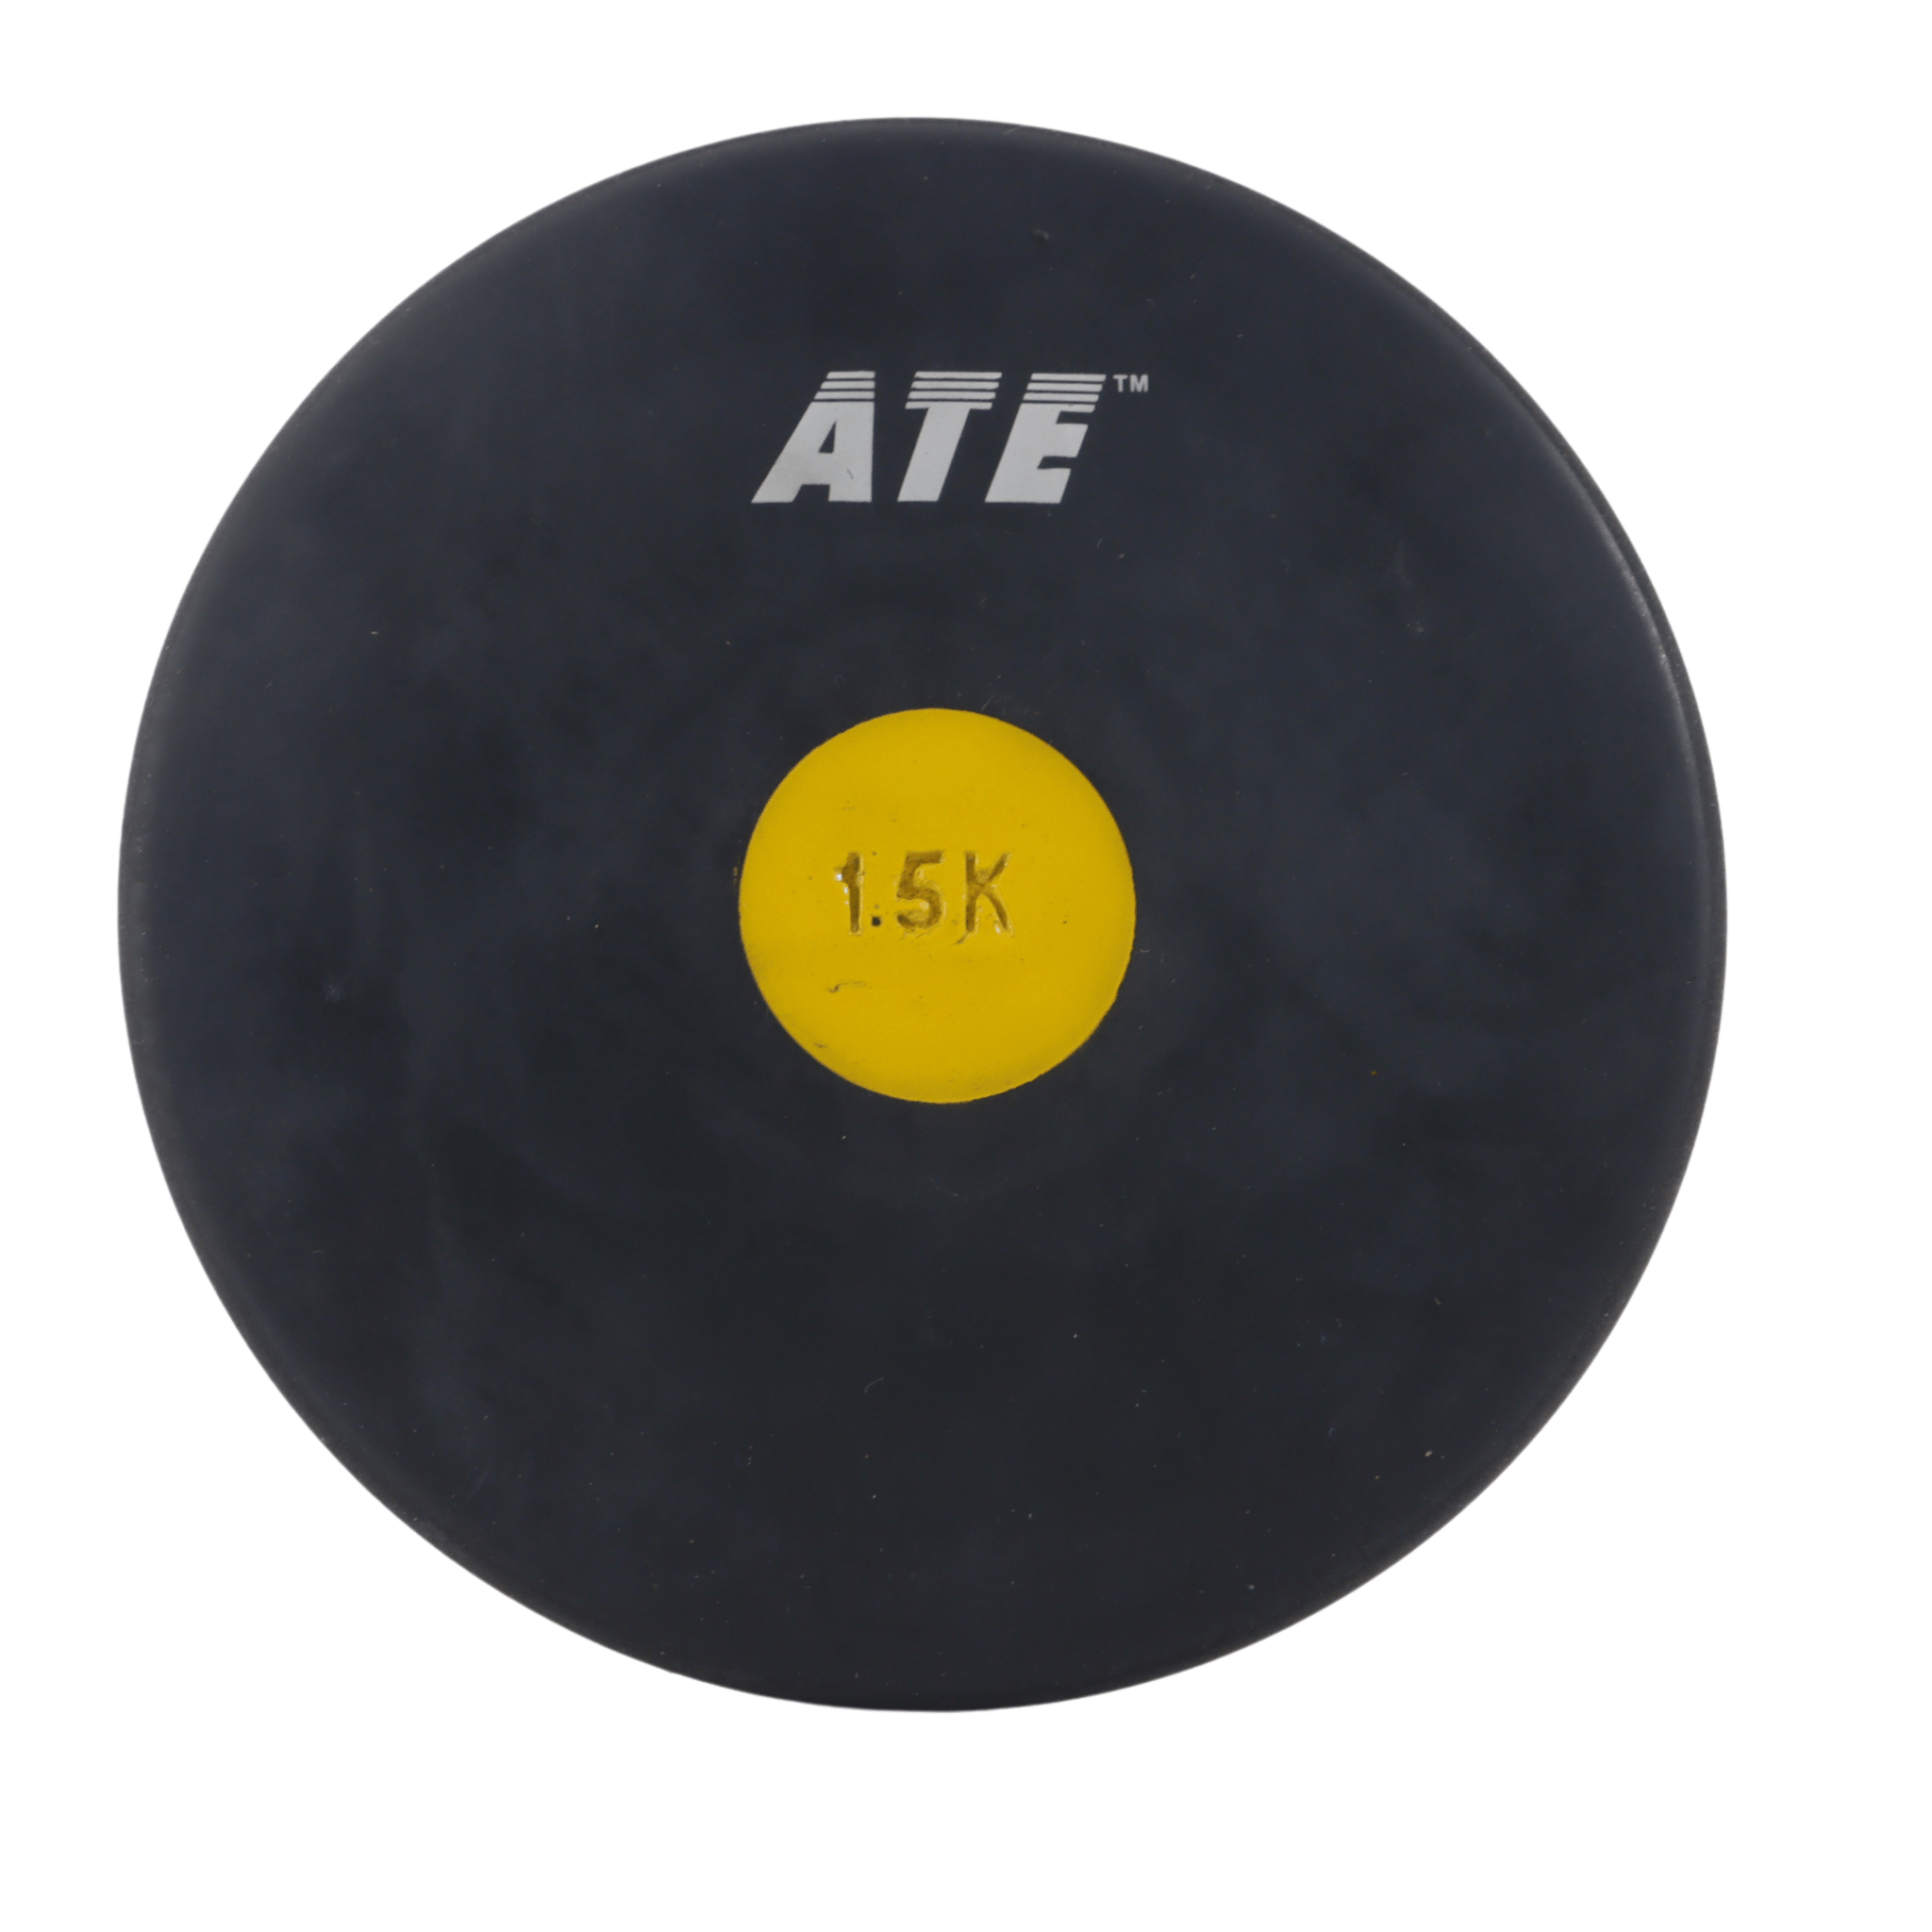 Rubber Discus | Solid black rubber with yellow centre 1.5kg | ATE brand